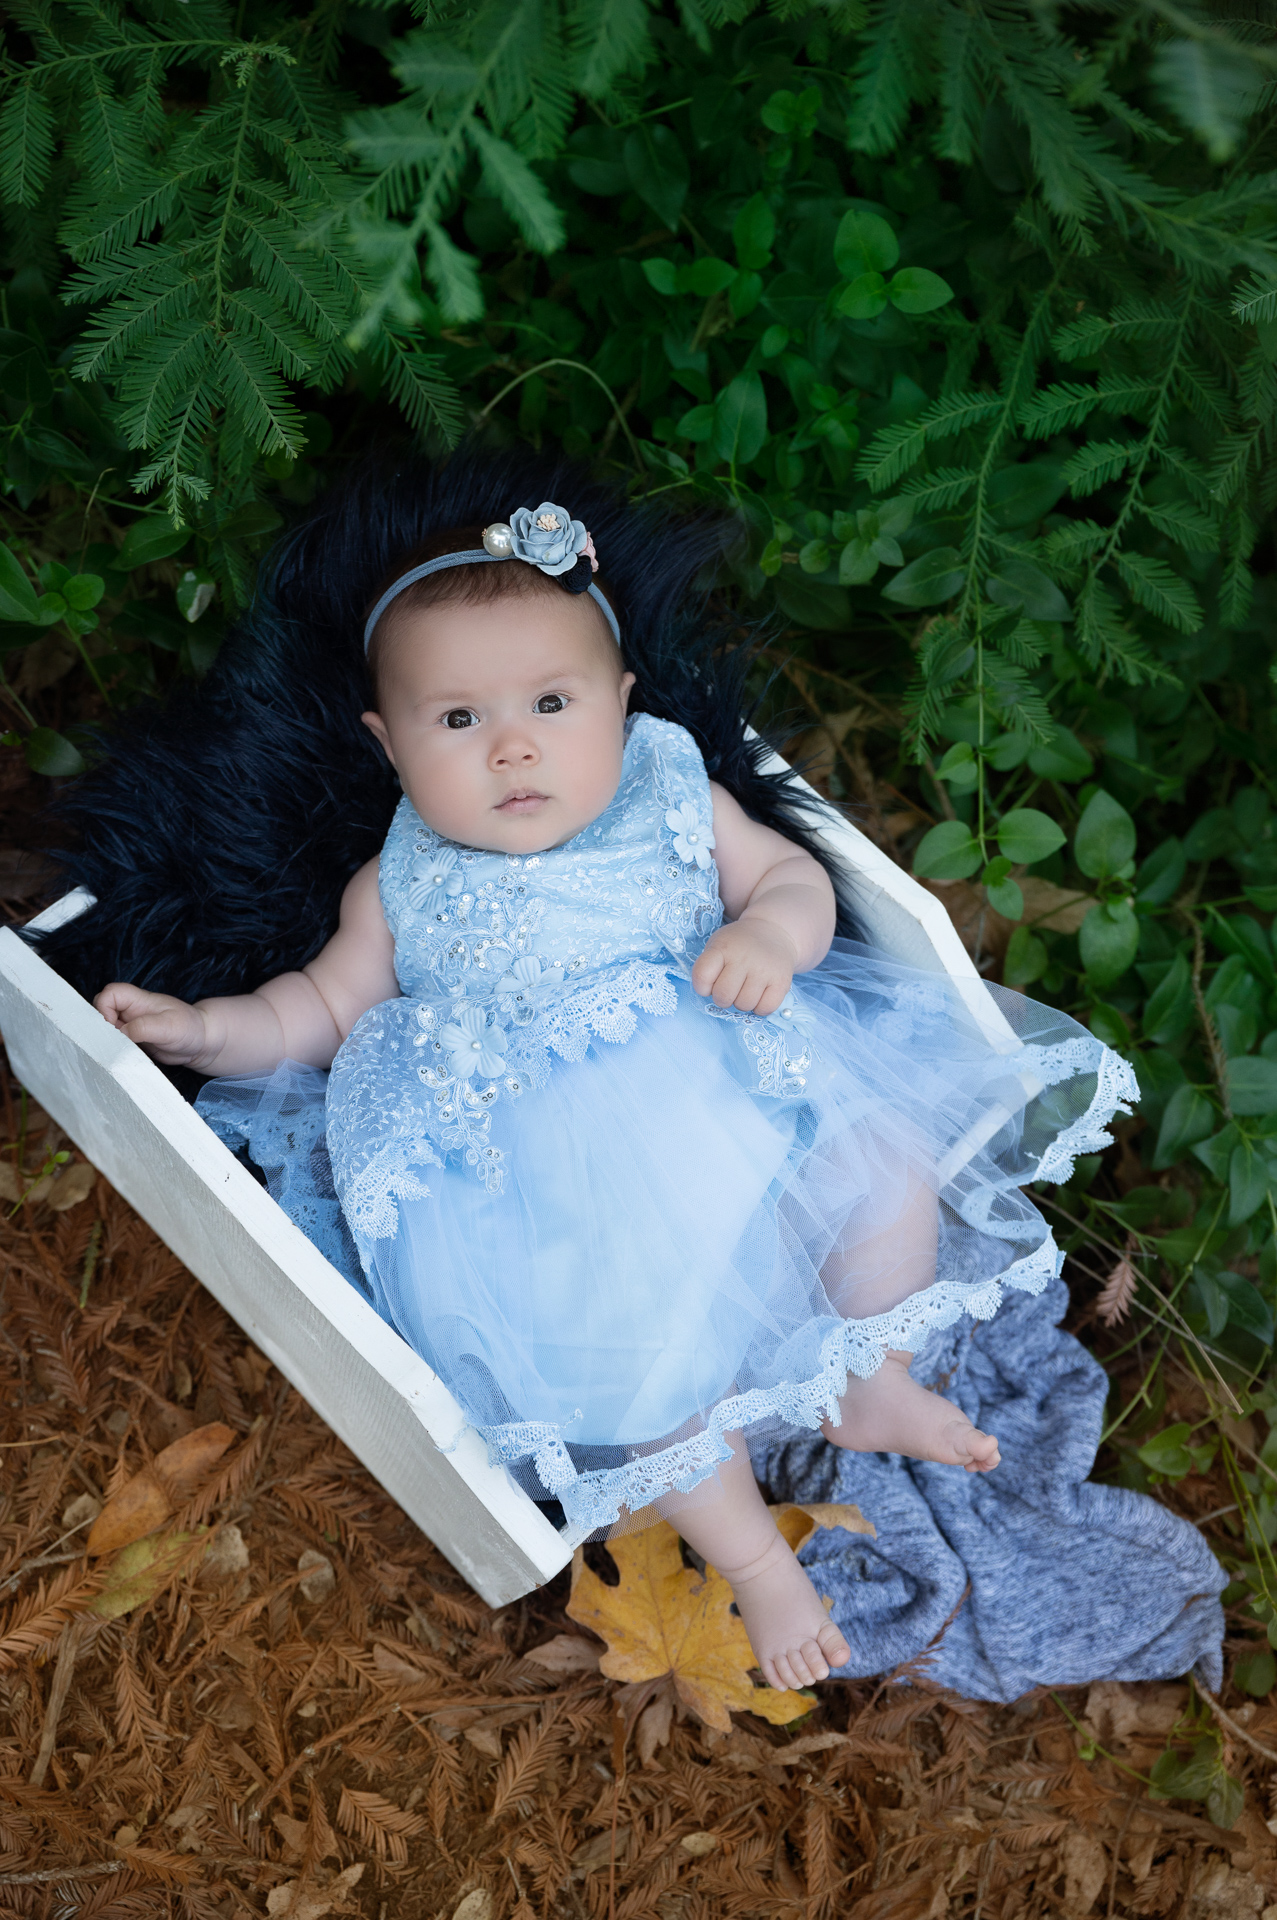 4 months baby girl posing outdoors on white basket wearing light blue dress and headband